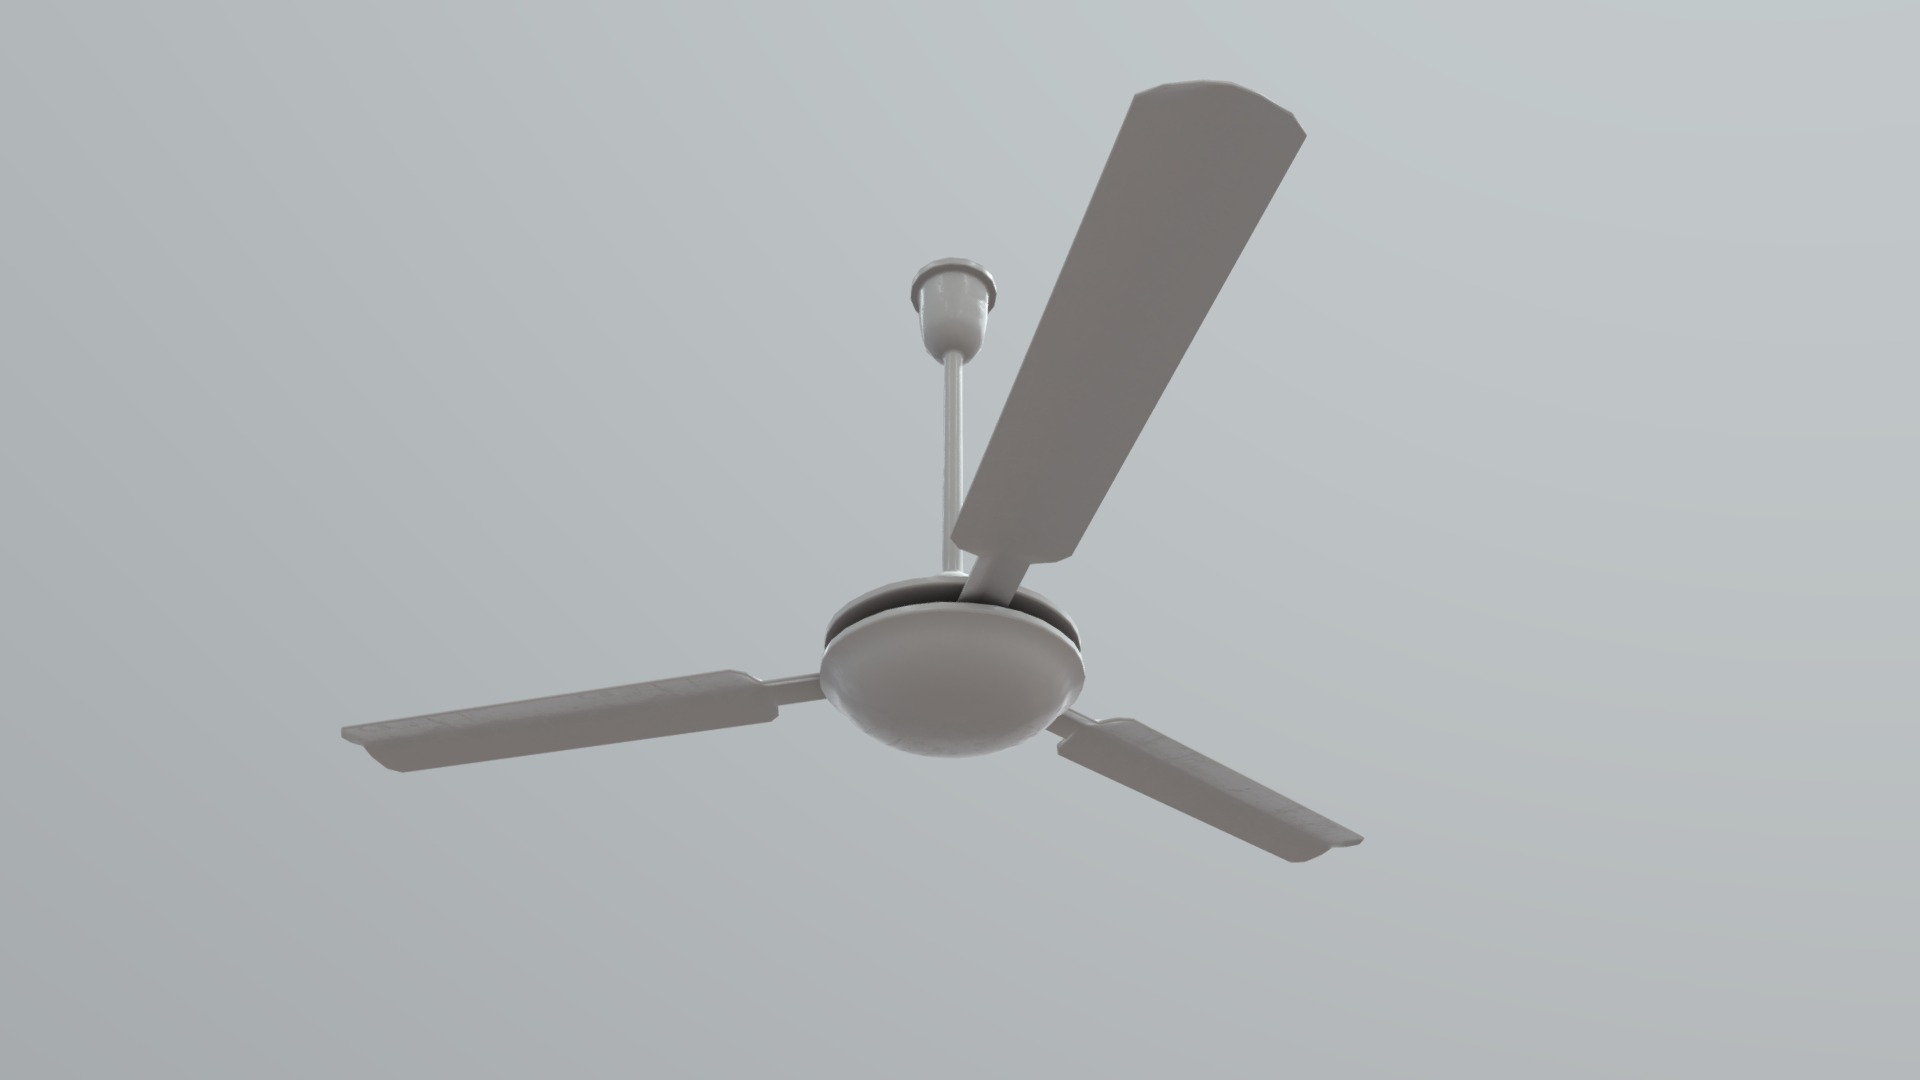 3D model Ceiling Fan - This is a 3D model of the Ceiling Fan. The 3D model is about a ceiling fan with a light.